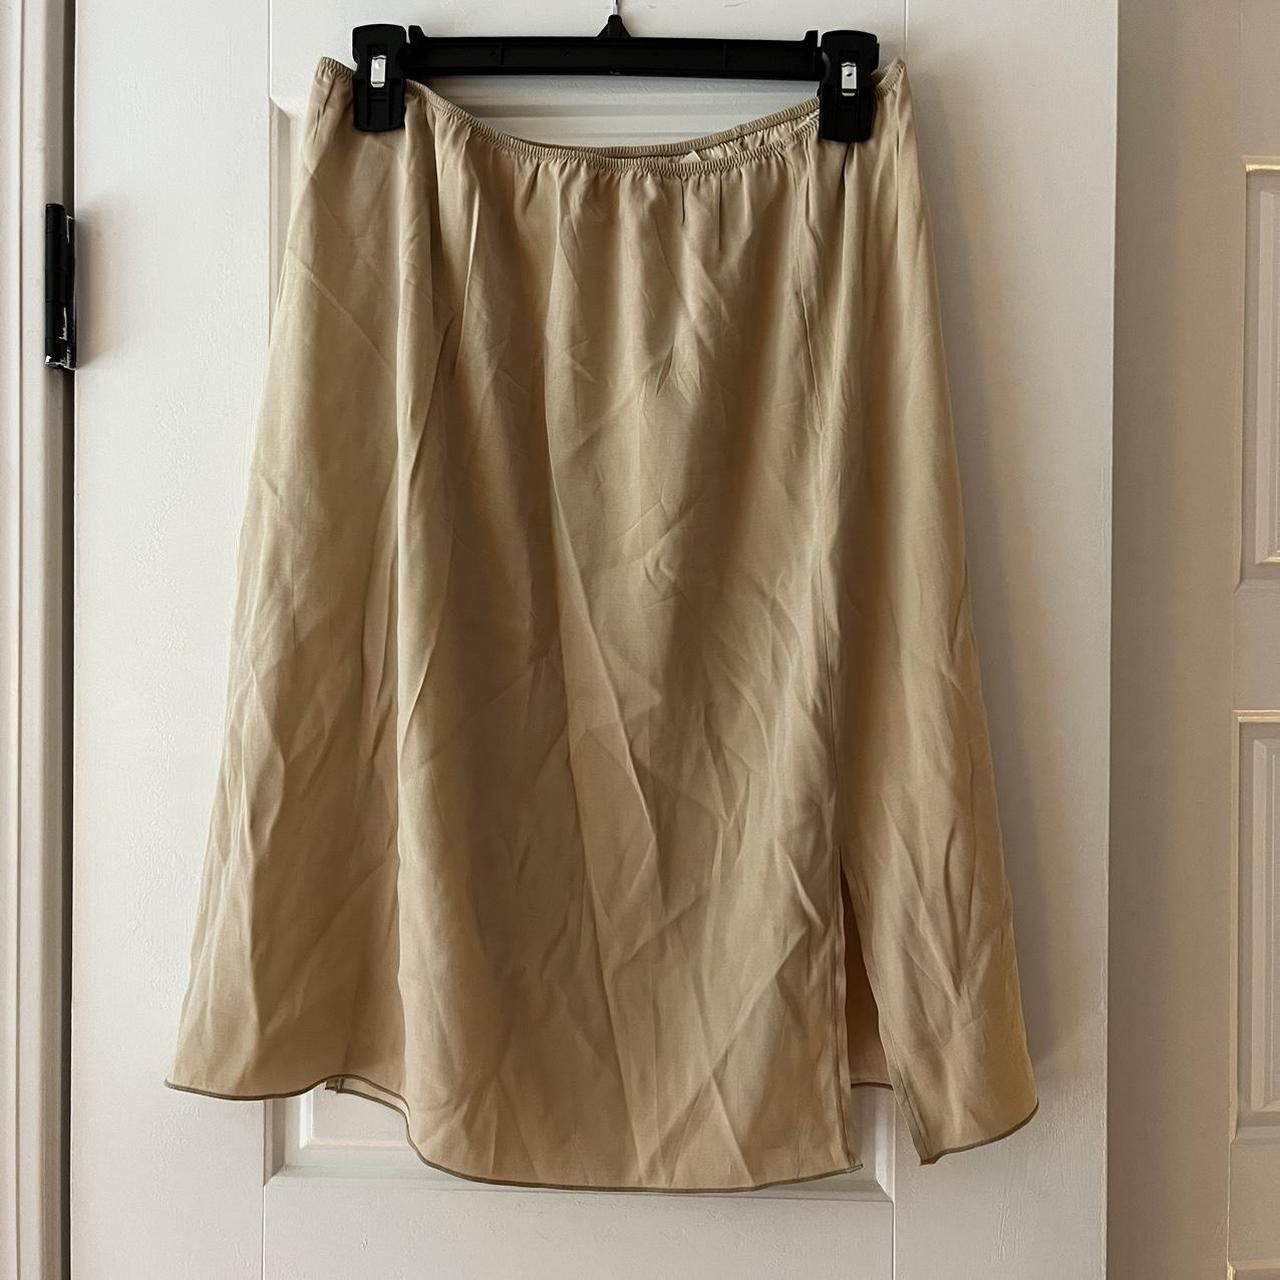 Marc Jacobs Women's Tan and Grey Skirt (3)